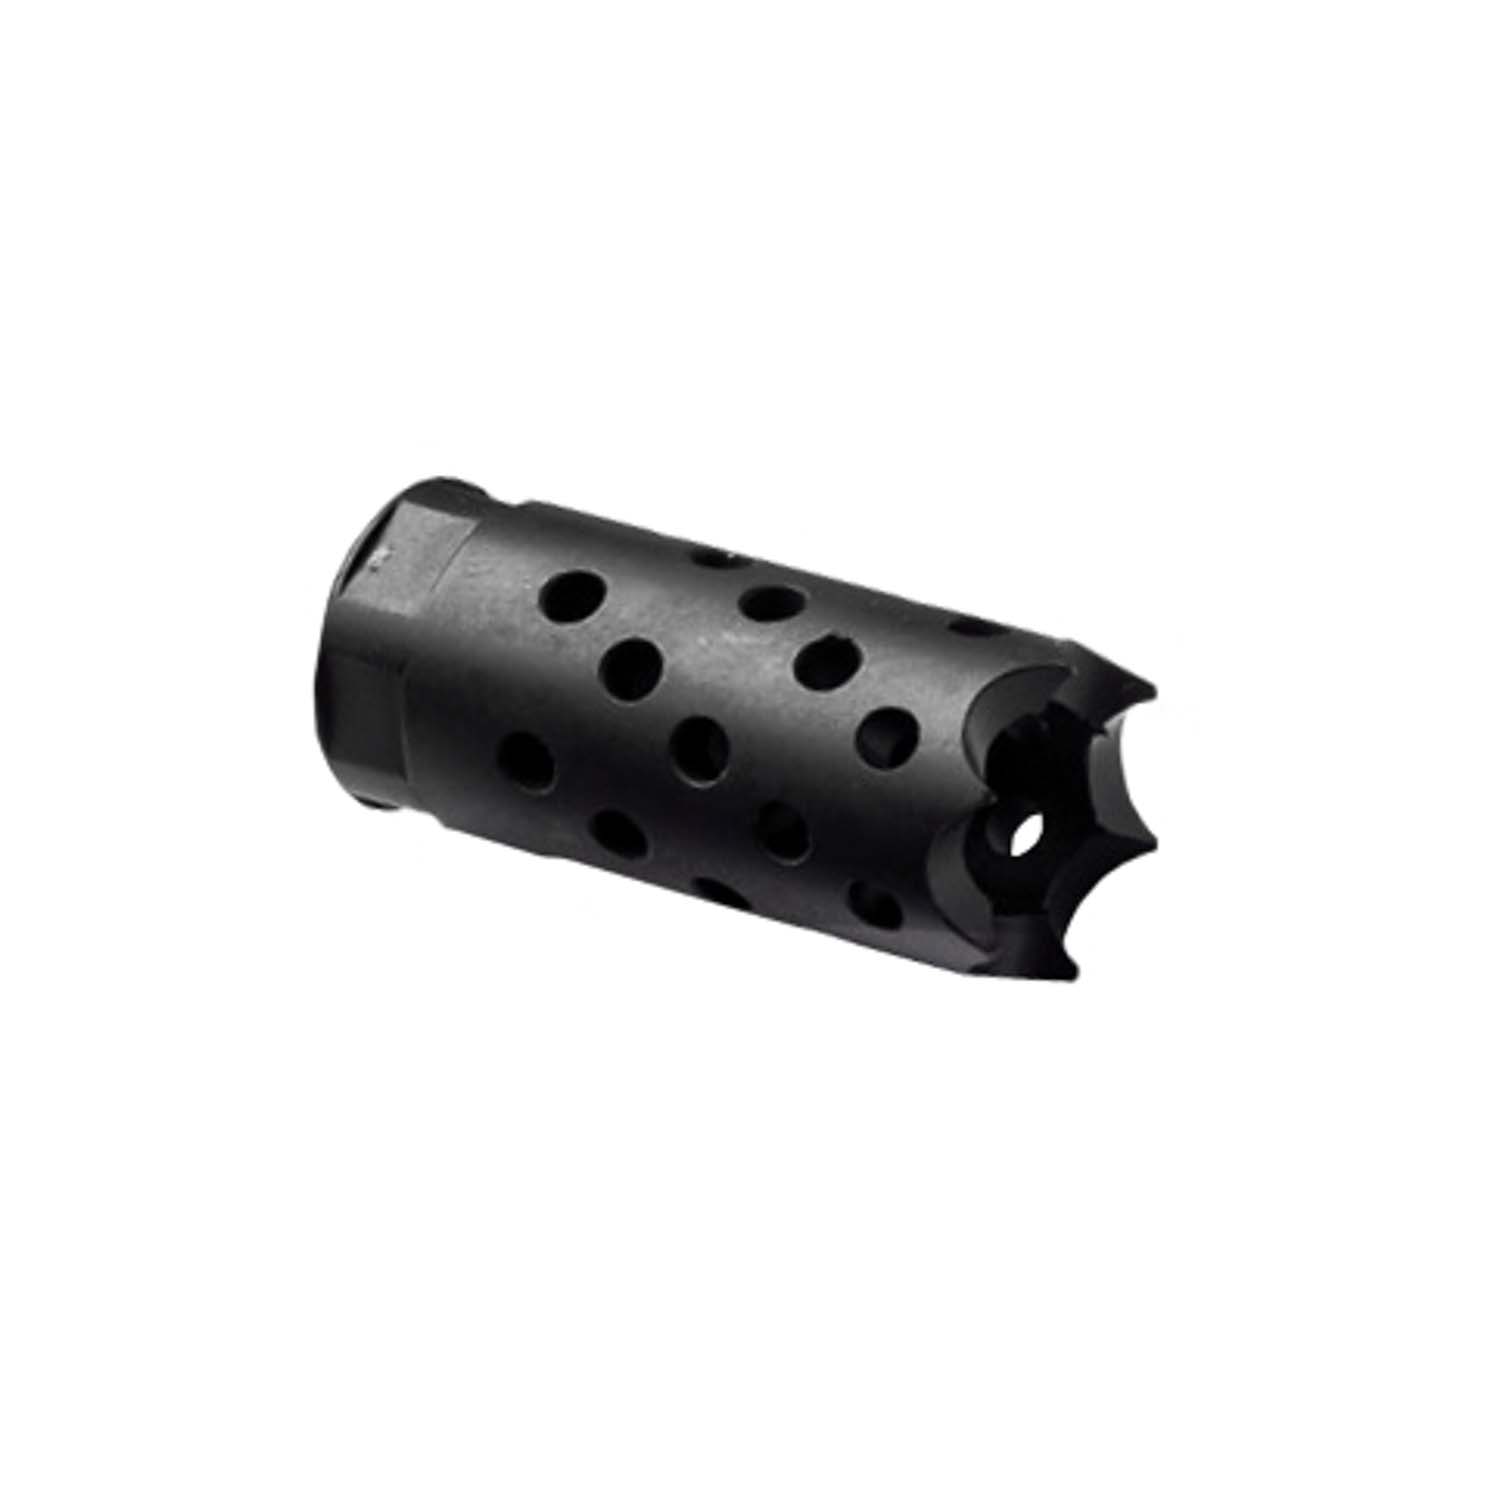 Omega Defence 9mm Muzzle Brake 1/2x28 - Rangeview Sports Canada